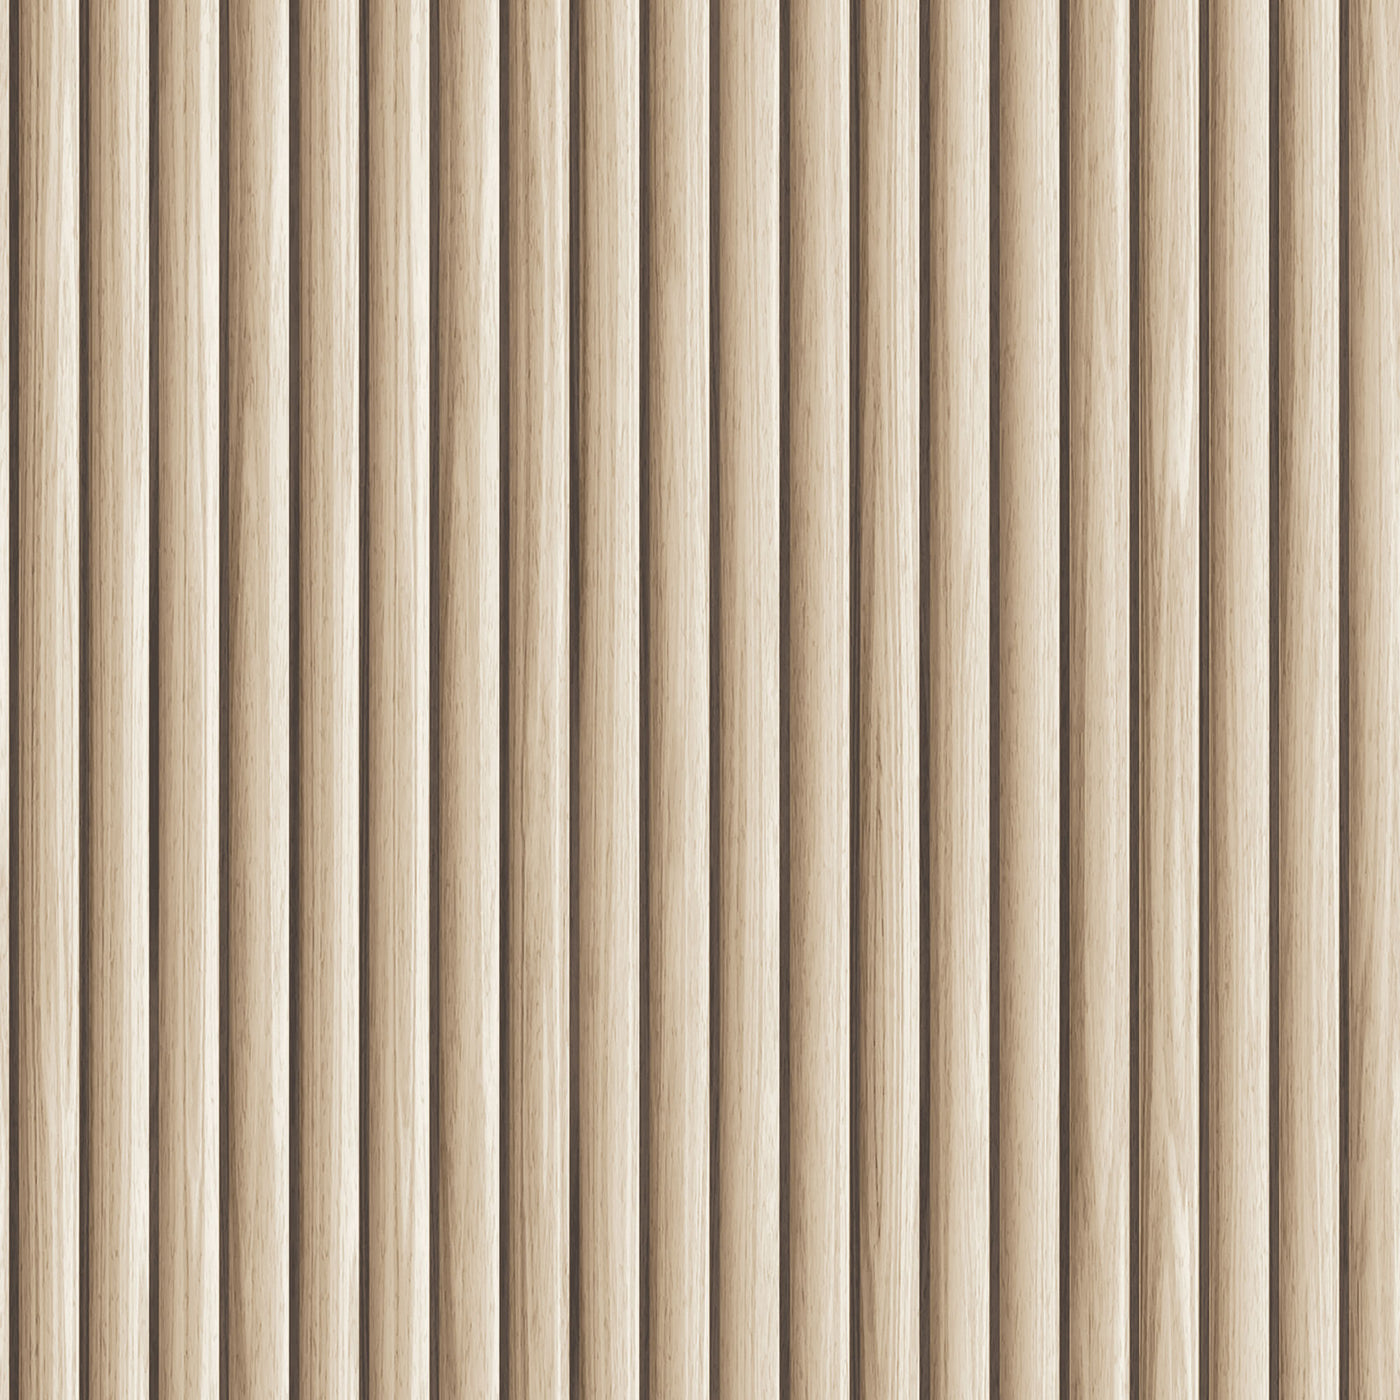 An up-close swatch of Reeded Wood peel and stick wallpaper.